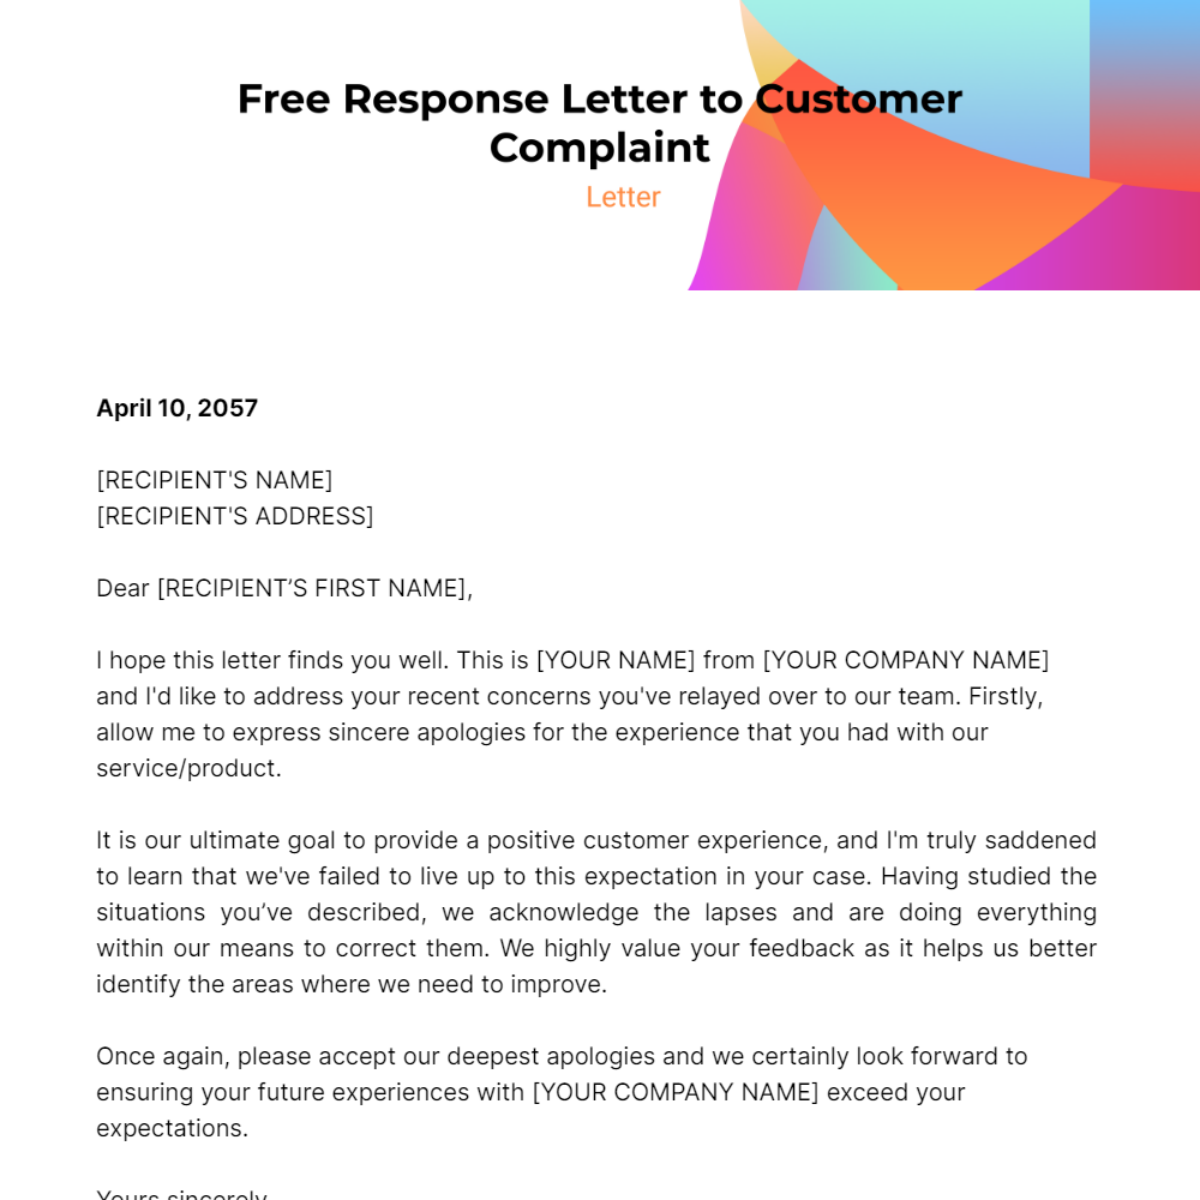 Free Response Letter to Customer Complaint